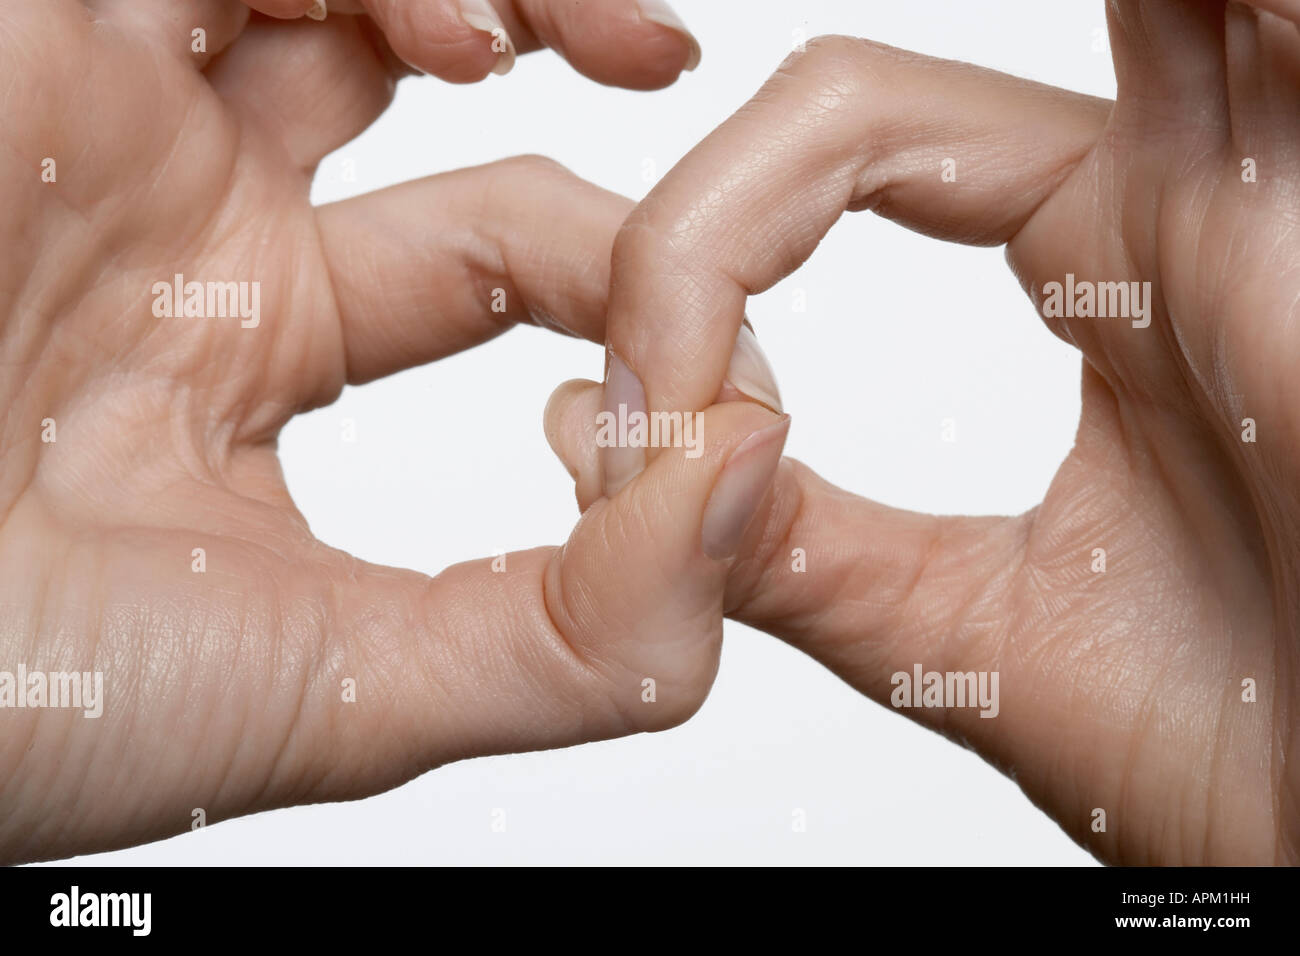 Fingers linked, close-up Stock Photo